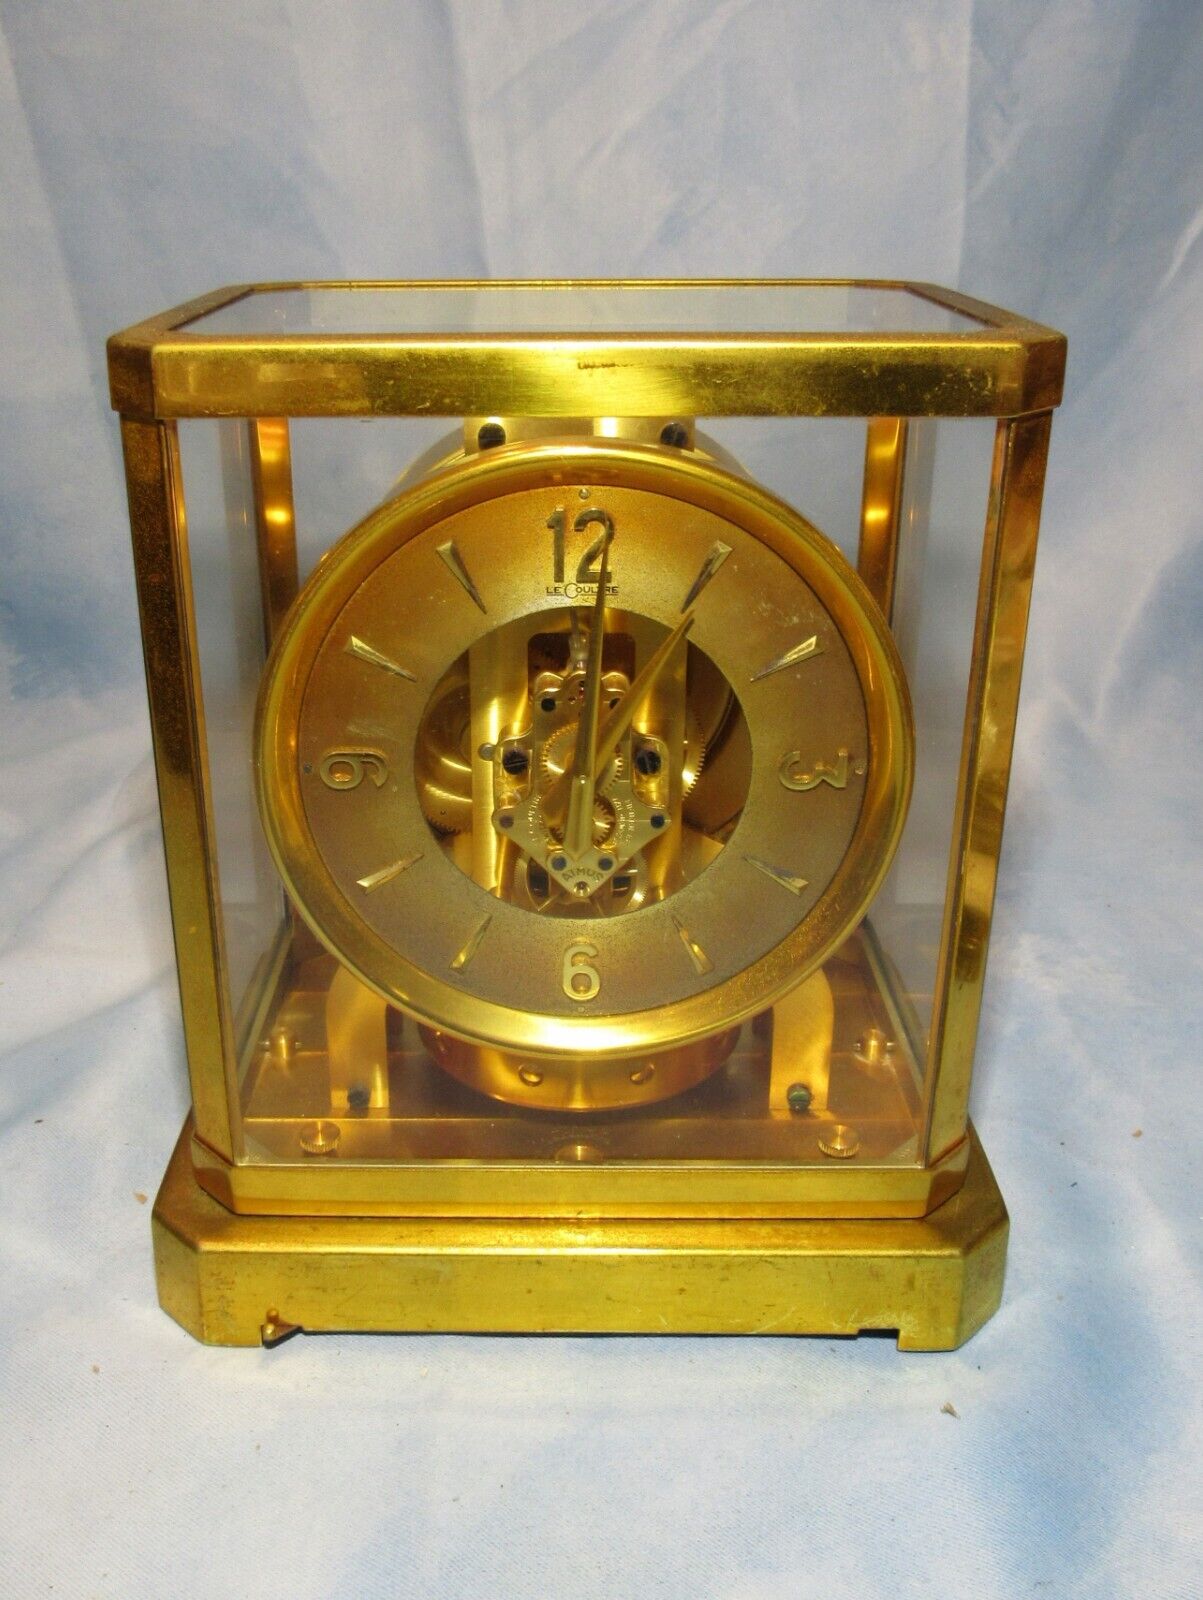 LeCoultre ATMOS Clock running, some condition issues.